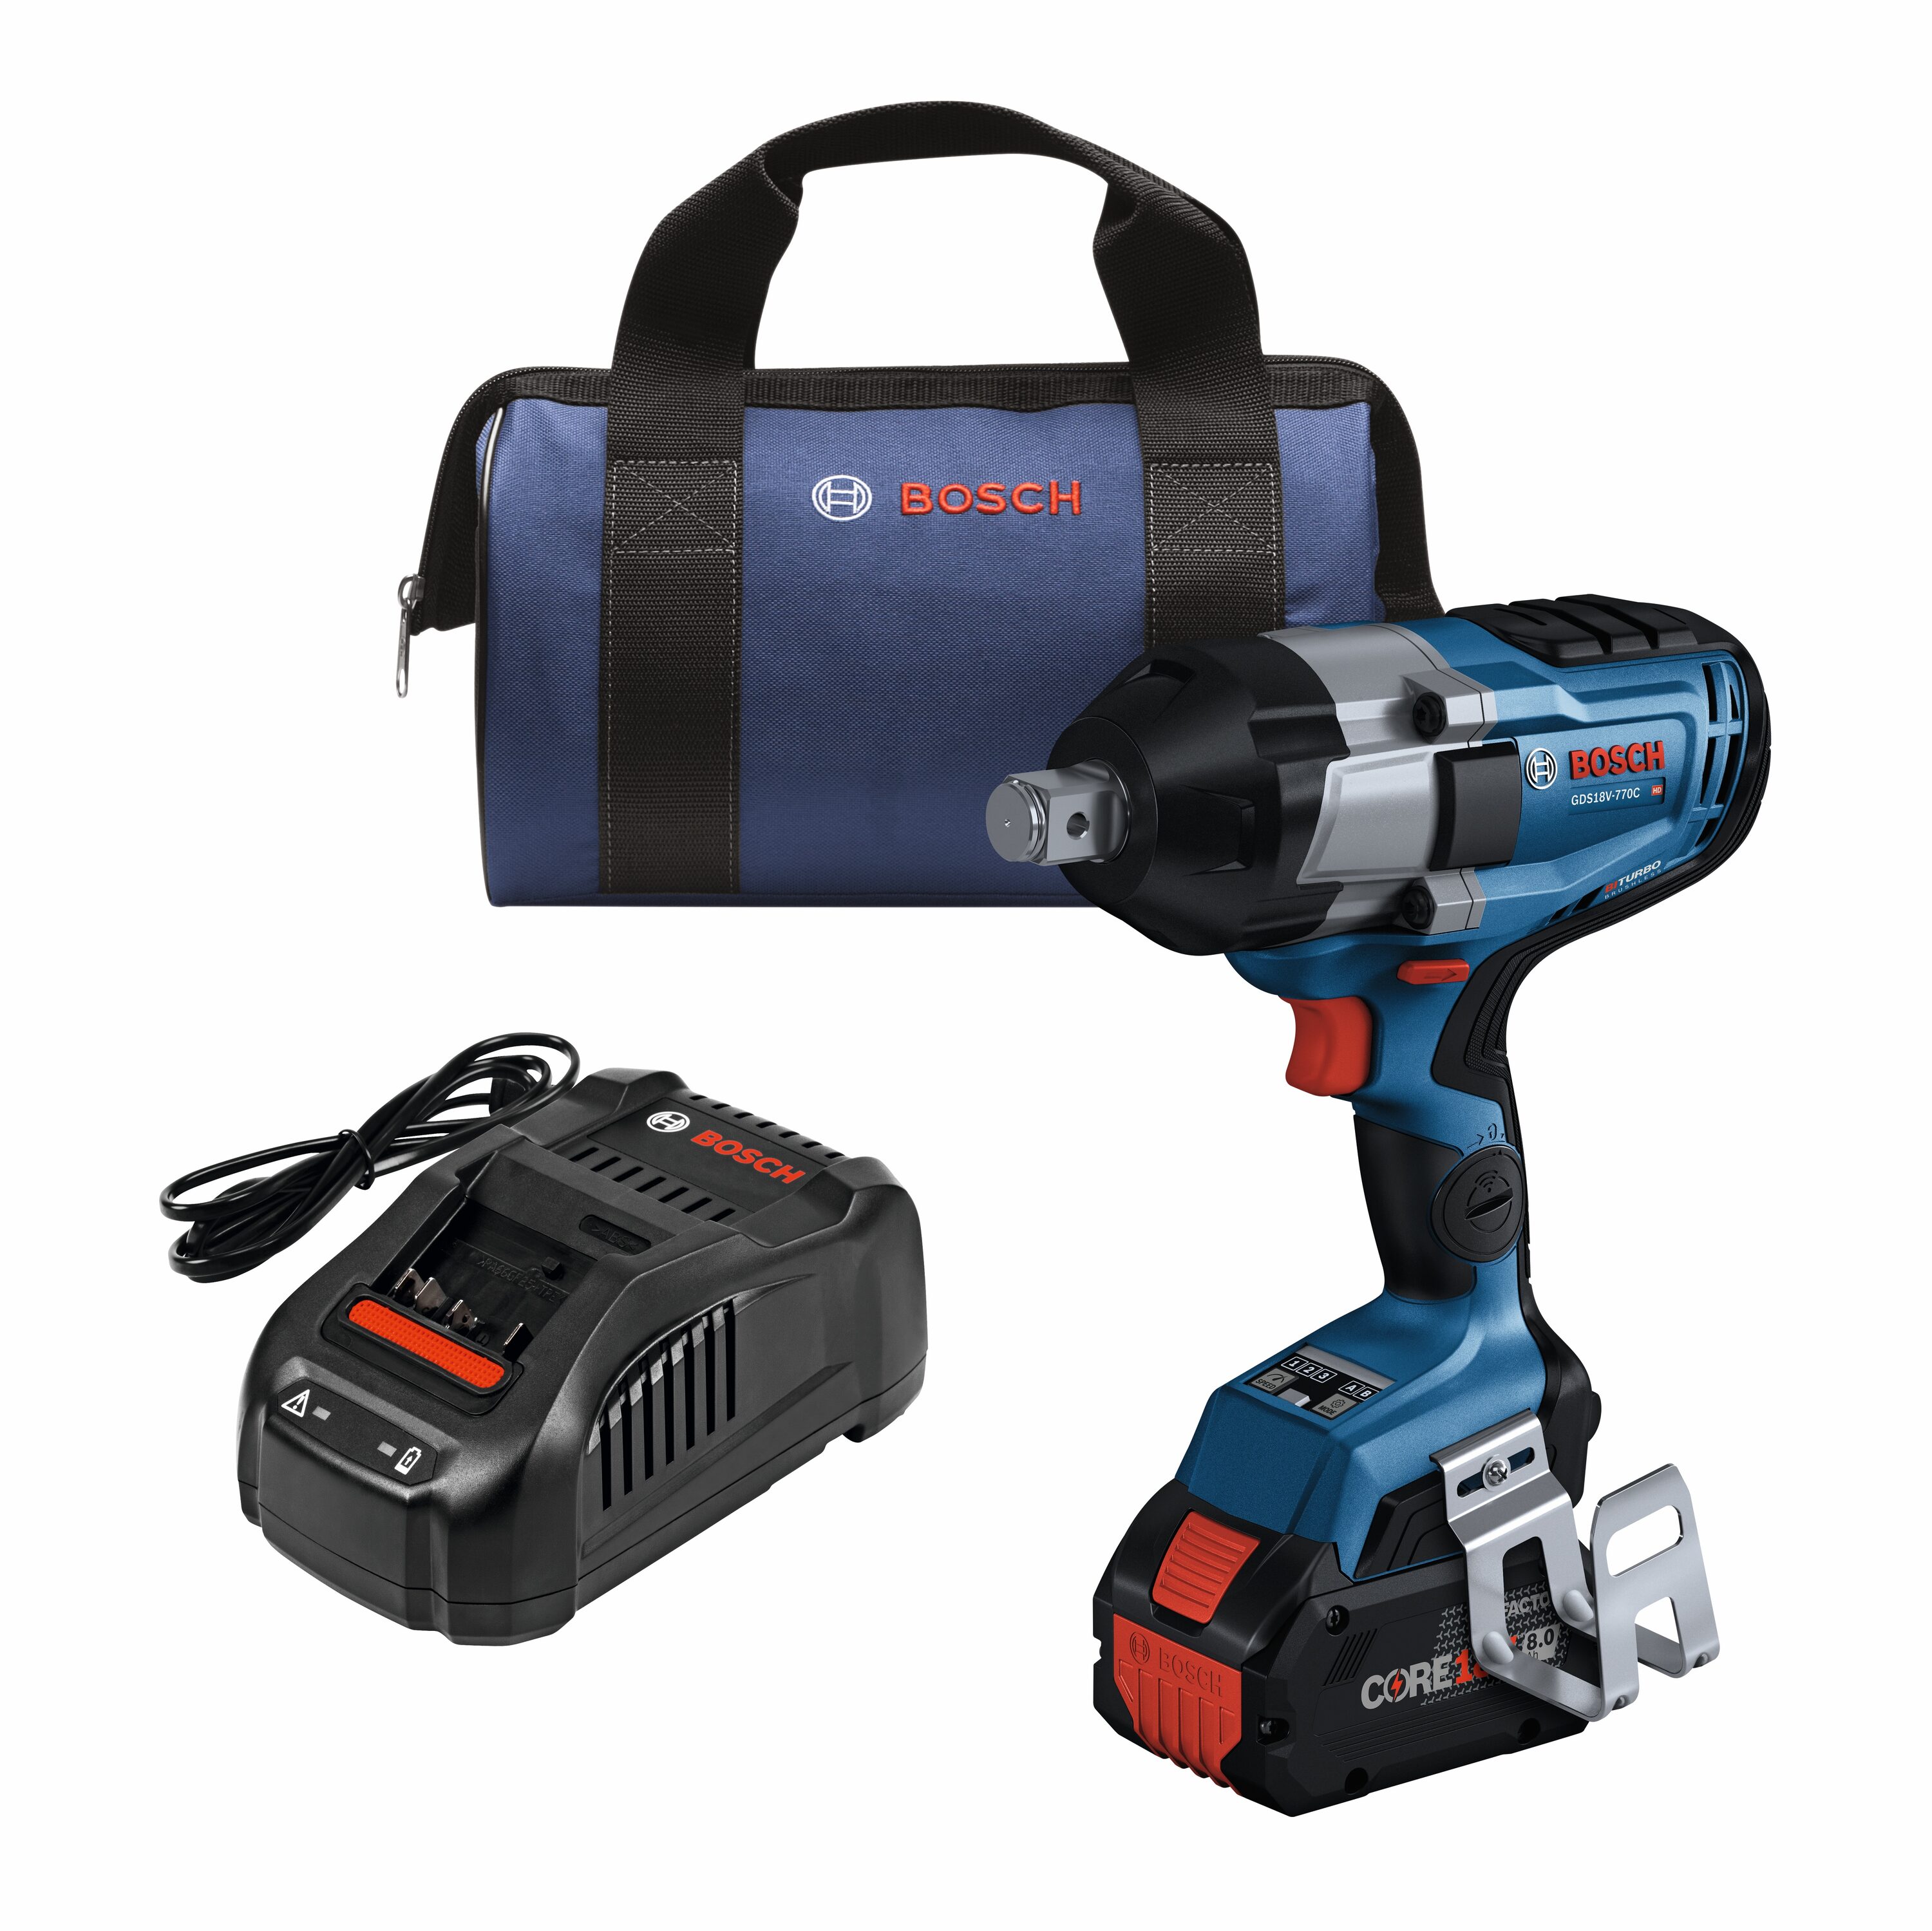 Bosch Gds18v-400 Impact Wrench Professional 18v 400n.m Brushless Electric  Cordless Wrench Durable Power Tools Without Battery - Electric Wrench -  AliExpress